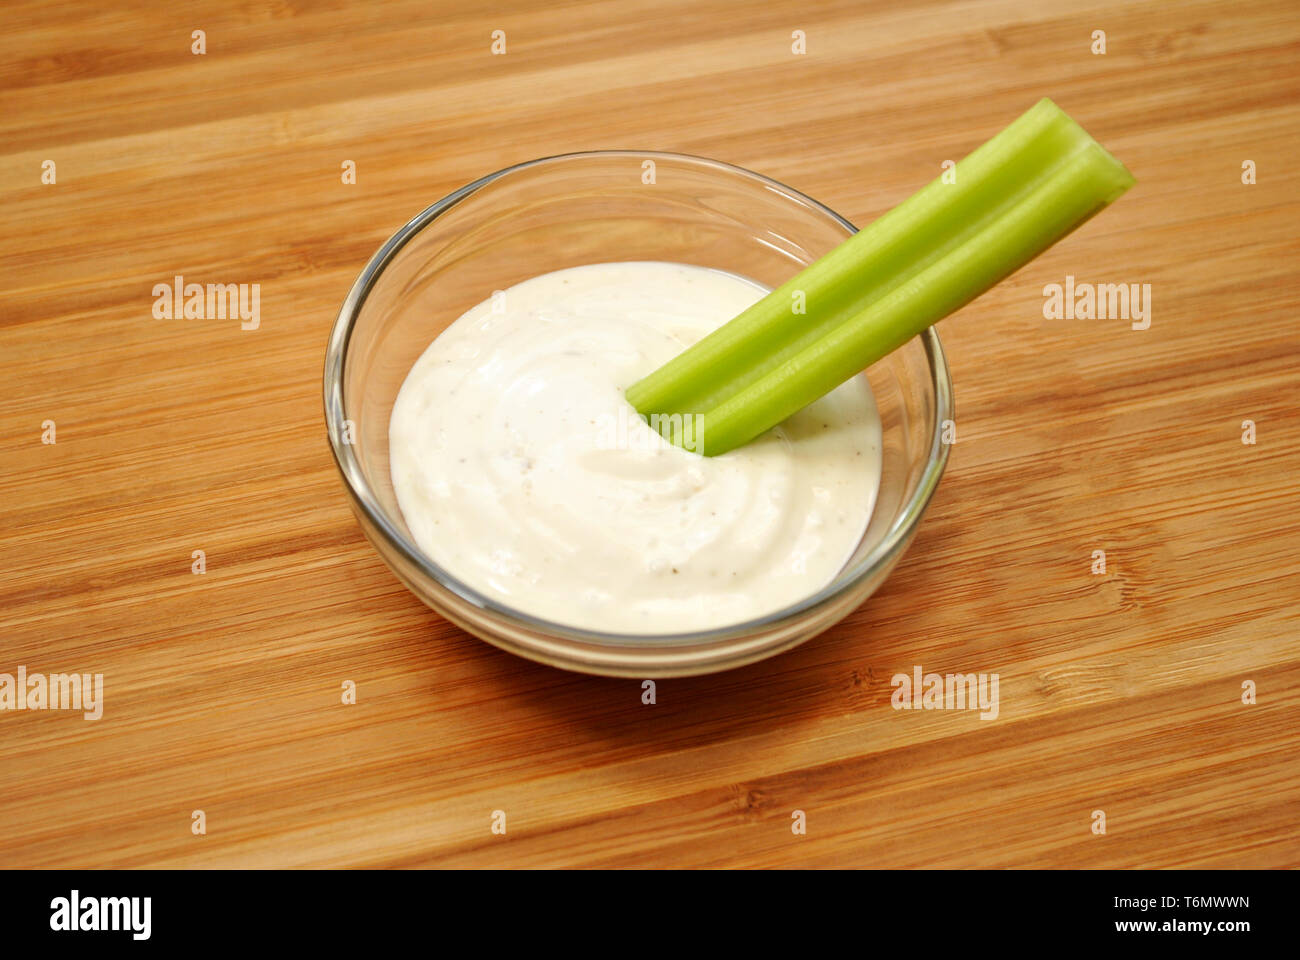 Celery in a Bowl with Dipping Sauce Stock Photo